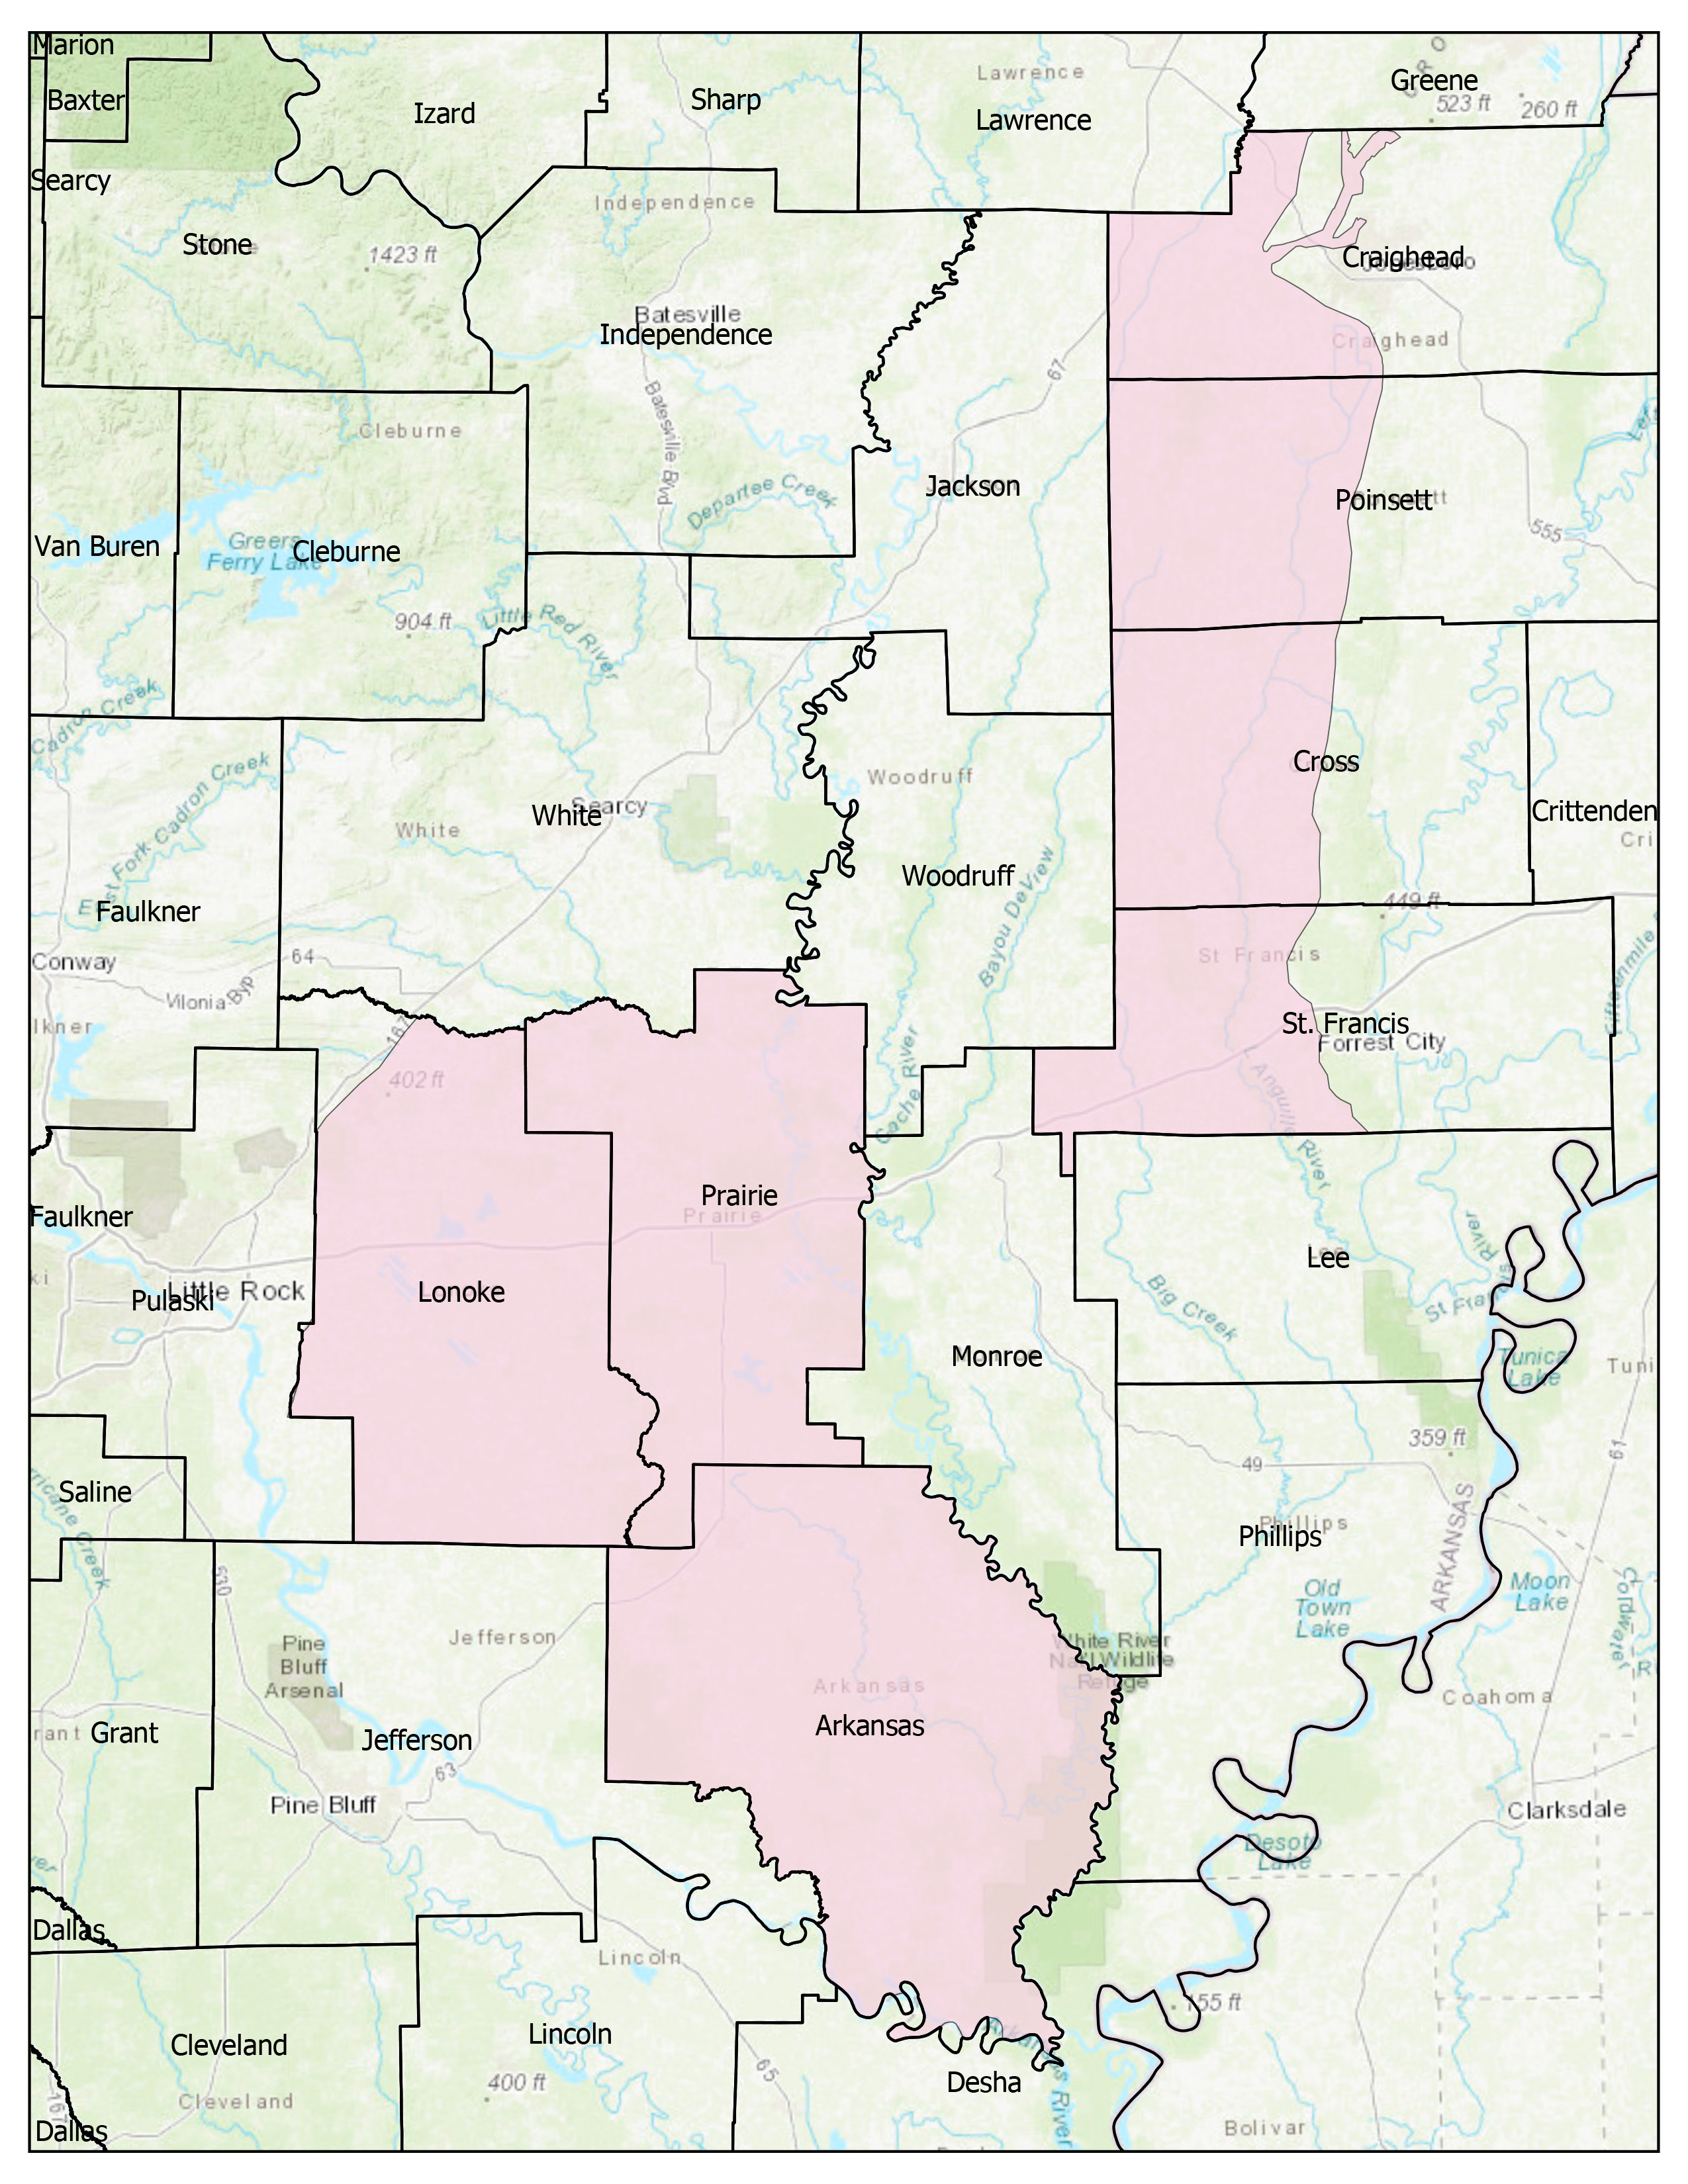 Arkansas Groundwater Initiative (AGI) Overview Map